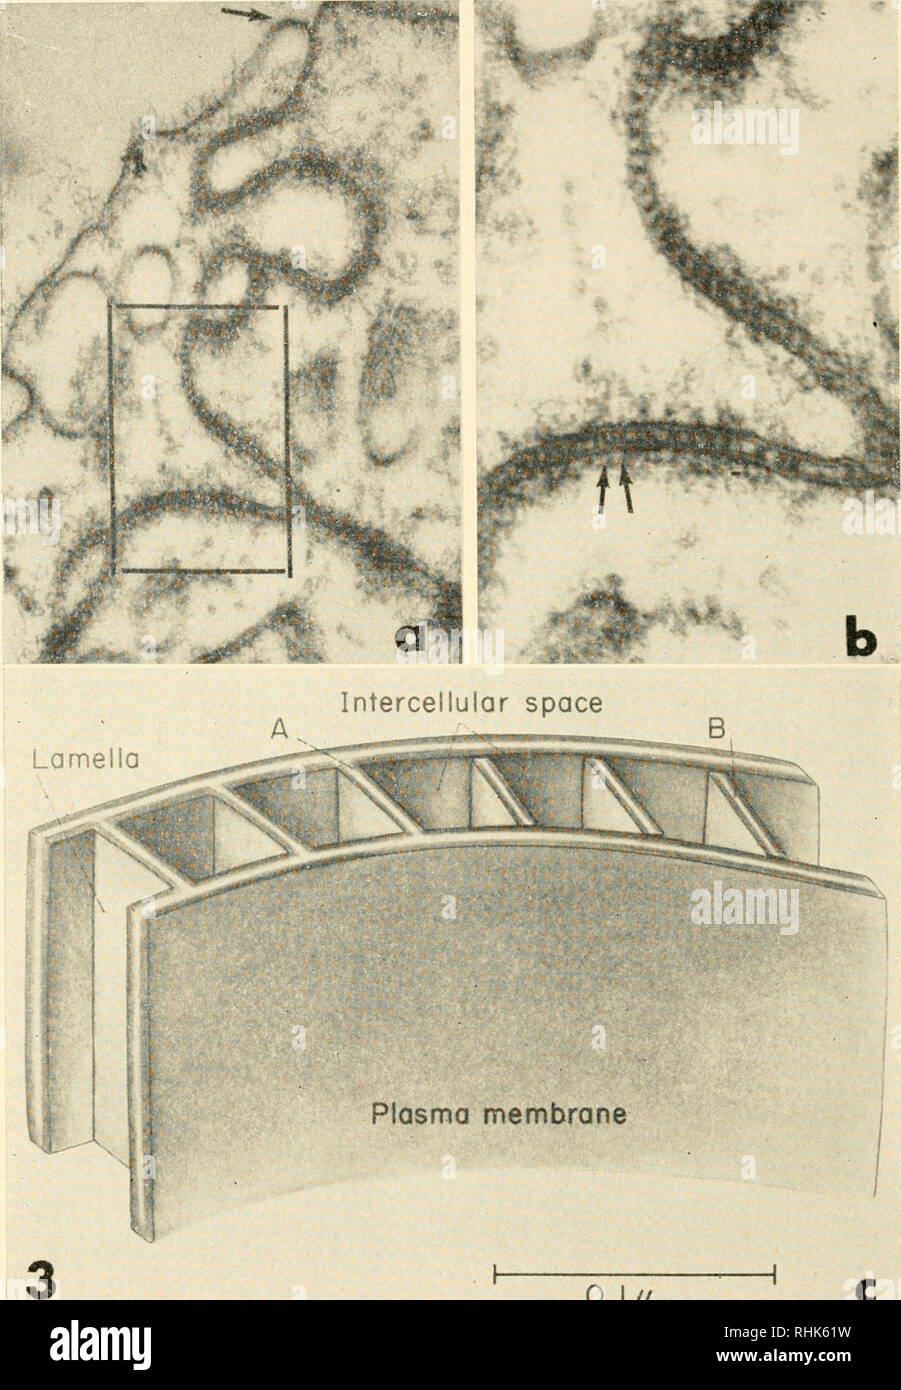 . The biology of hydra and of some other coelenterates, 1961. Hydra; Cnidaria; Ctenophora; Cnidaria; Hydra. Plasma membrane 0.1// Fig. 3. An epidermal septate desmosome of Pelamatohydra. The junction of three cells in a shows the reflection of ceil surfaces into the attachment region (arrow) and the prominent cross connections. At b the lower central portion of a (framed) is shown at higher magnification. At the double arrow the outer dense component of the lower plasma membrane appears to be continuous with the dense lines of the intercellular septa. The diagram at c illustrates the arrangeme Stock Photo